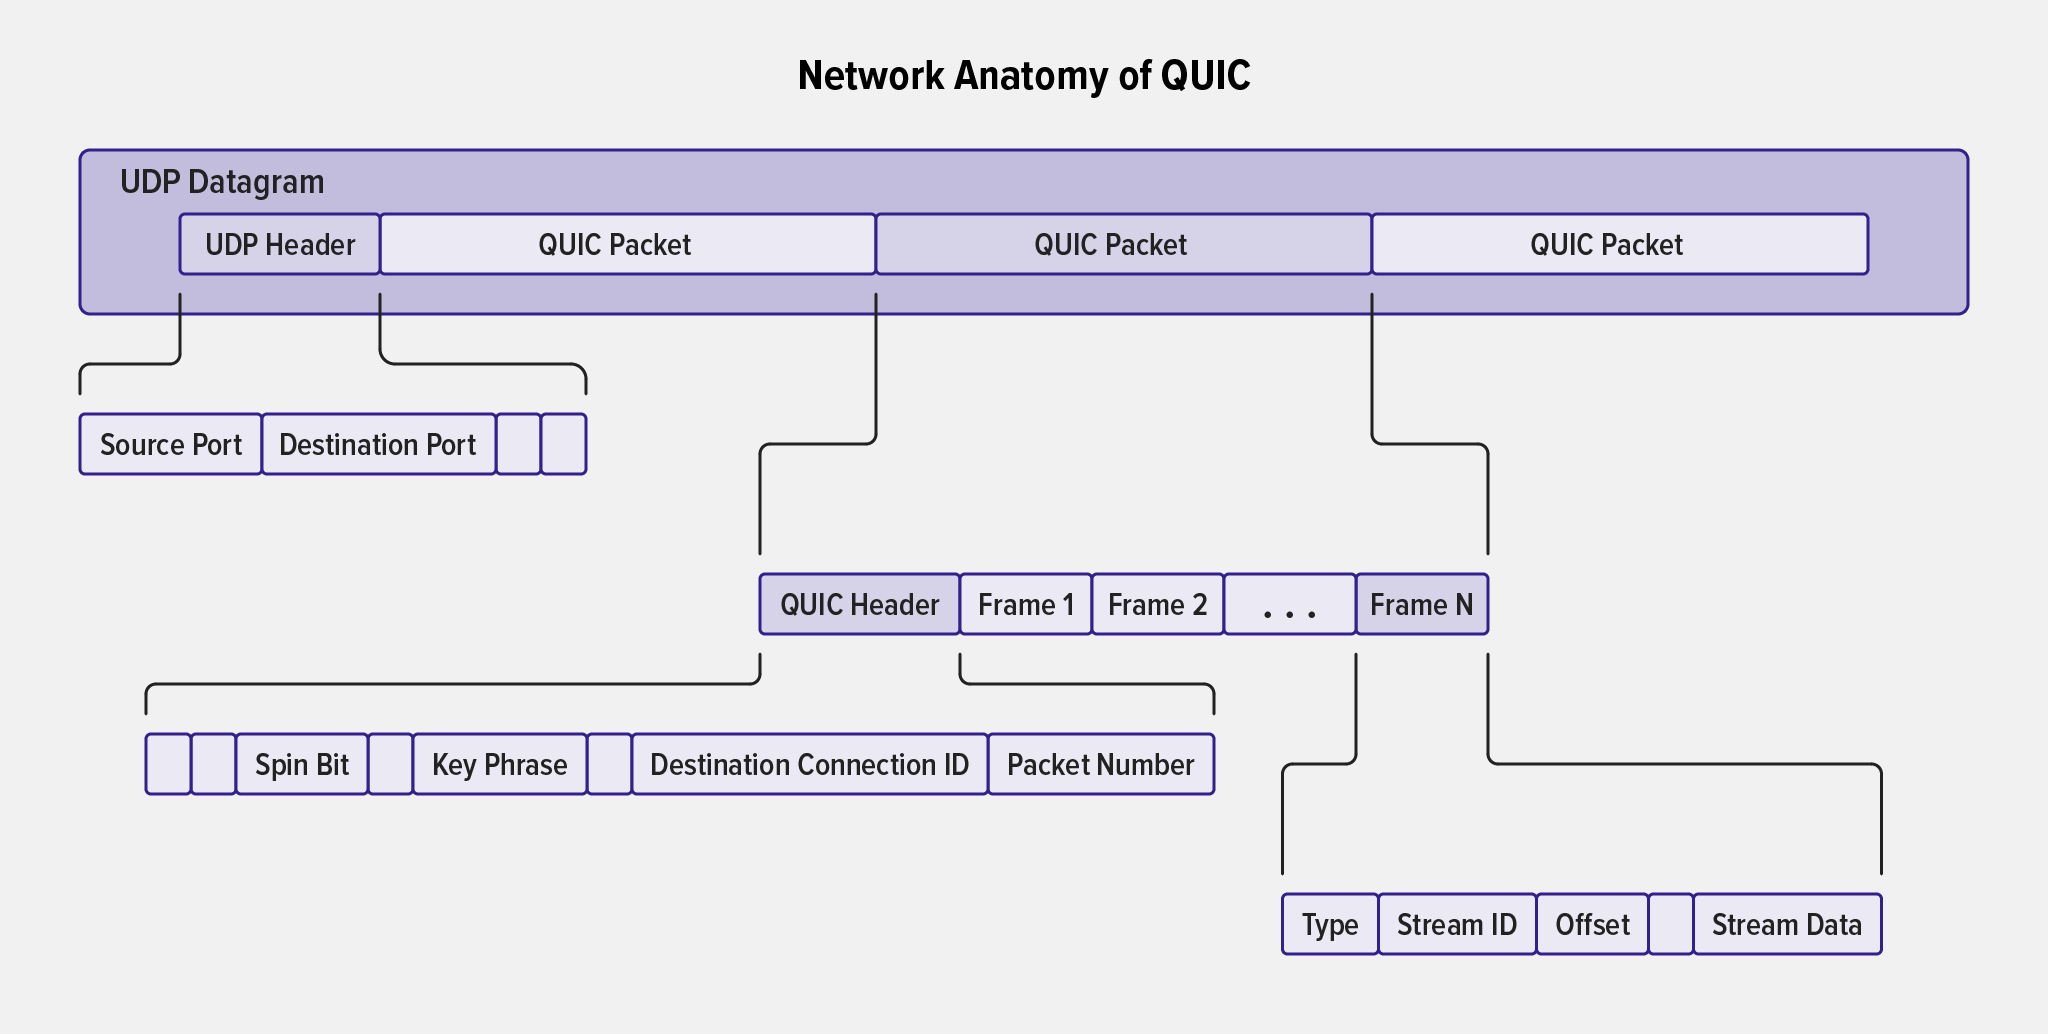 Diagram showing components of a QUIC stream: a UDP datagram containing a header and multiple QUIC packets; the components in a QUIC packet (a header and frames); the components in a QUIC header; the components in a frame